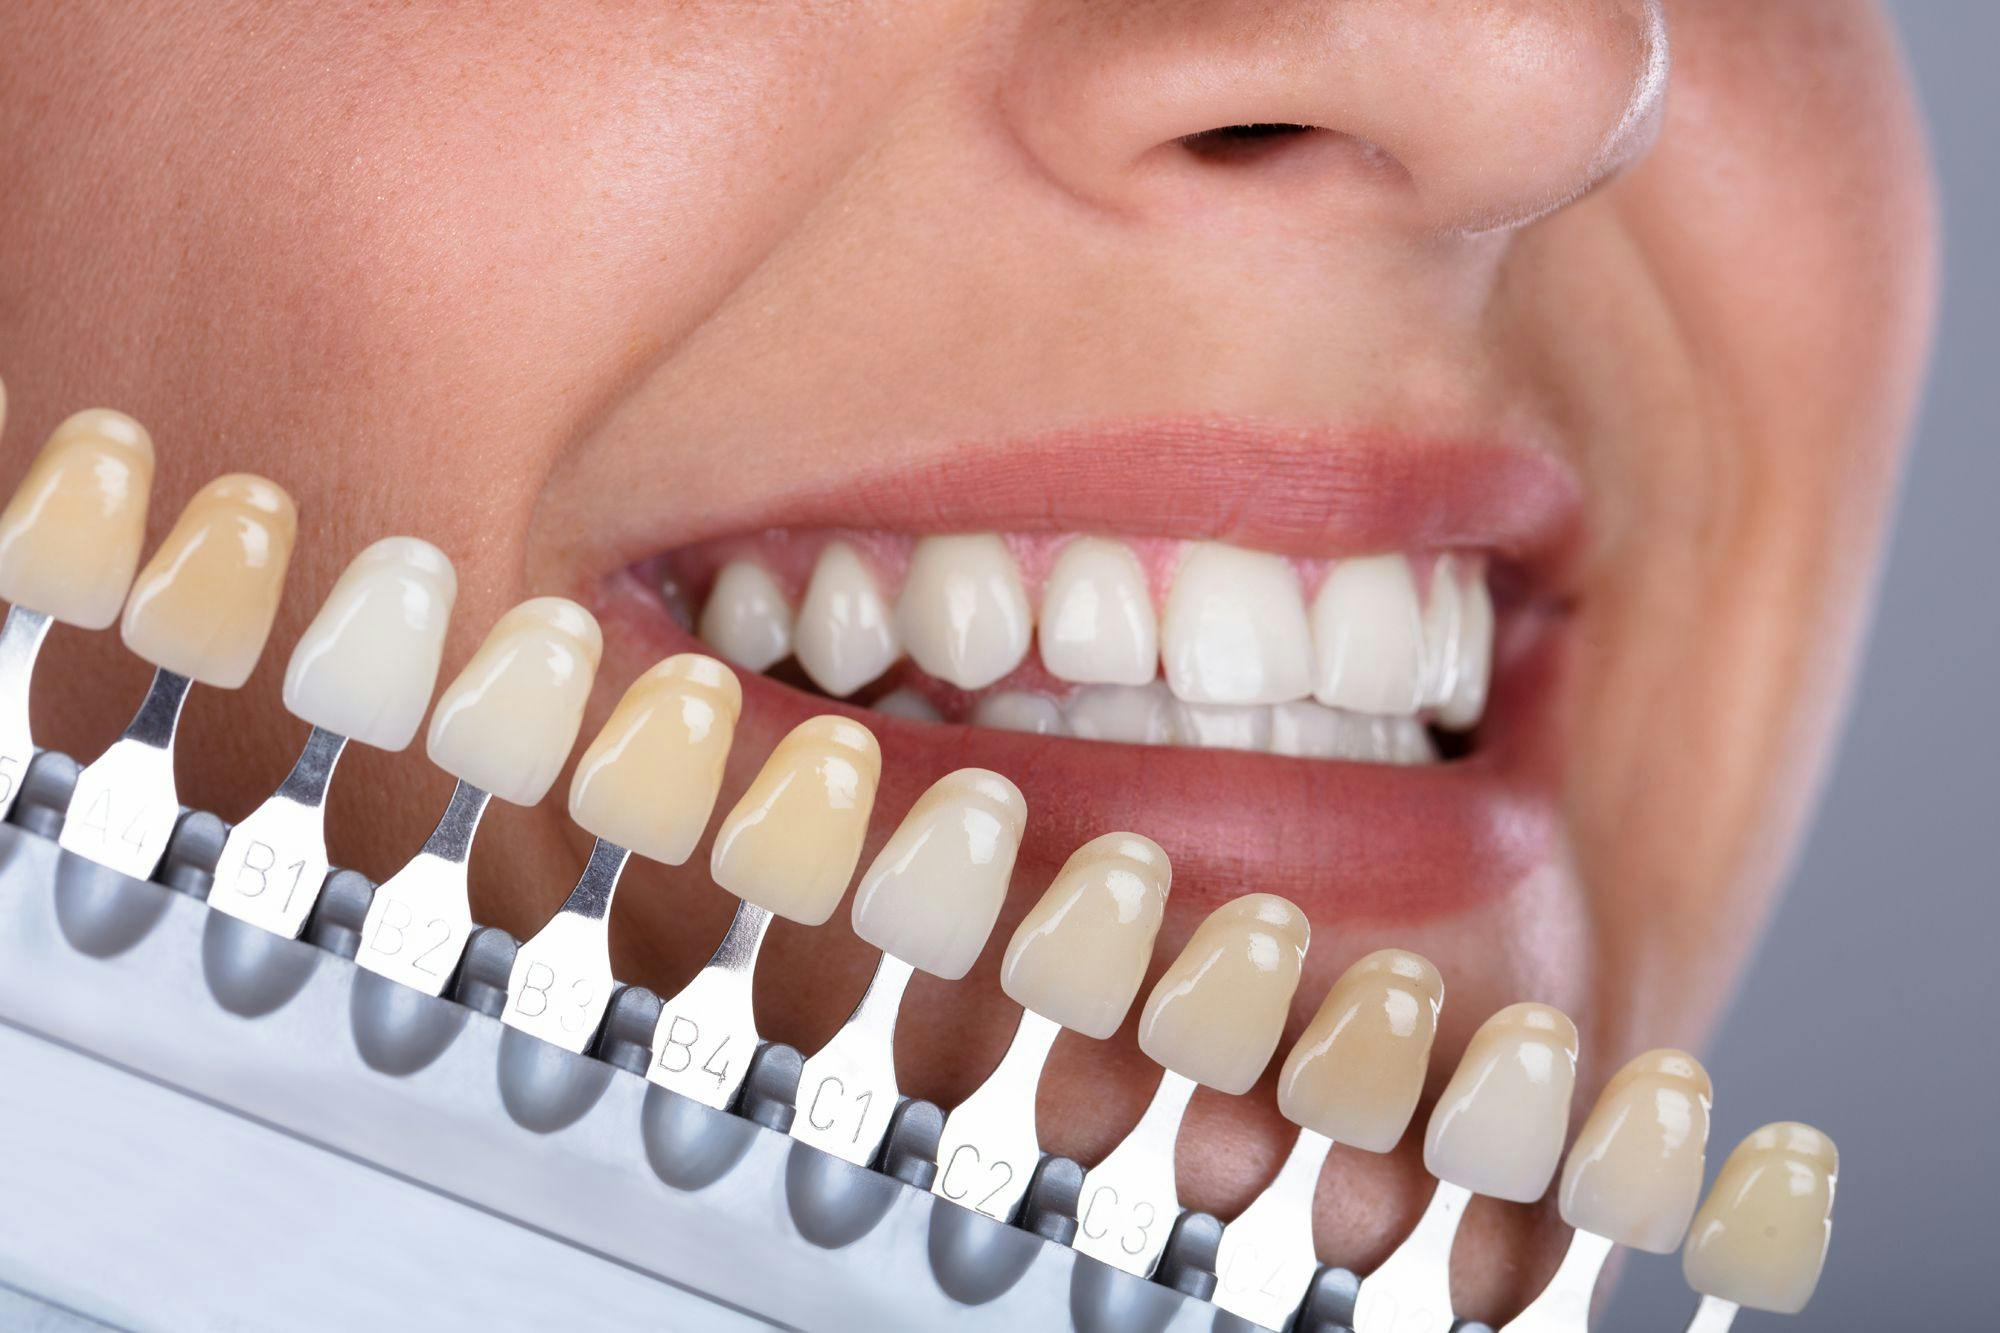 The Science Behind How Light Affects Color When Shade Matching Teeth. Photo courtesy of Andrey Popov/stock.adobe.com. 